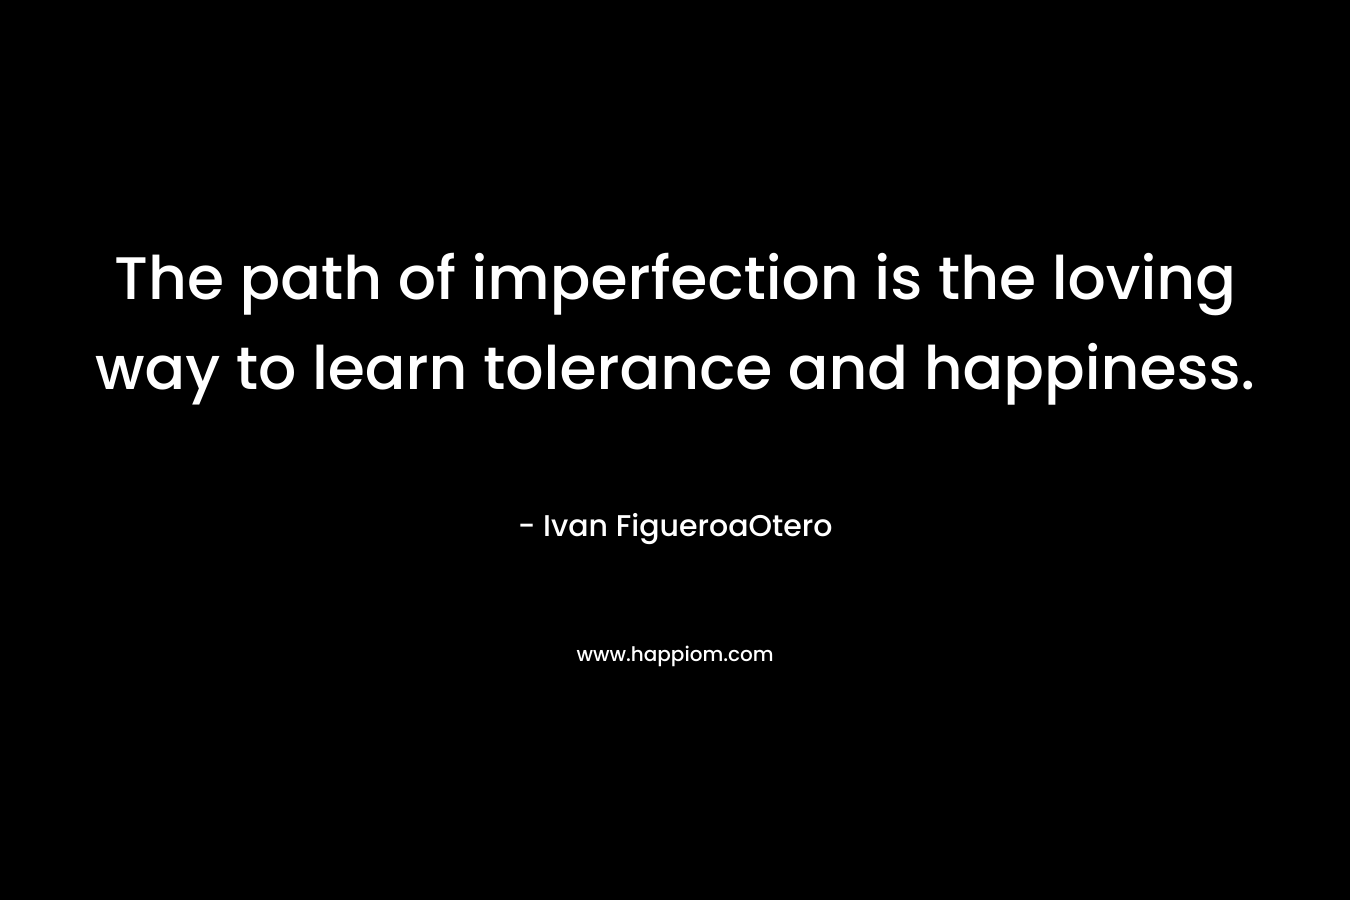 The path of imperfection is the loving way to learn tolerance and happiness. – Ivan FigueroaOtero